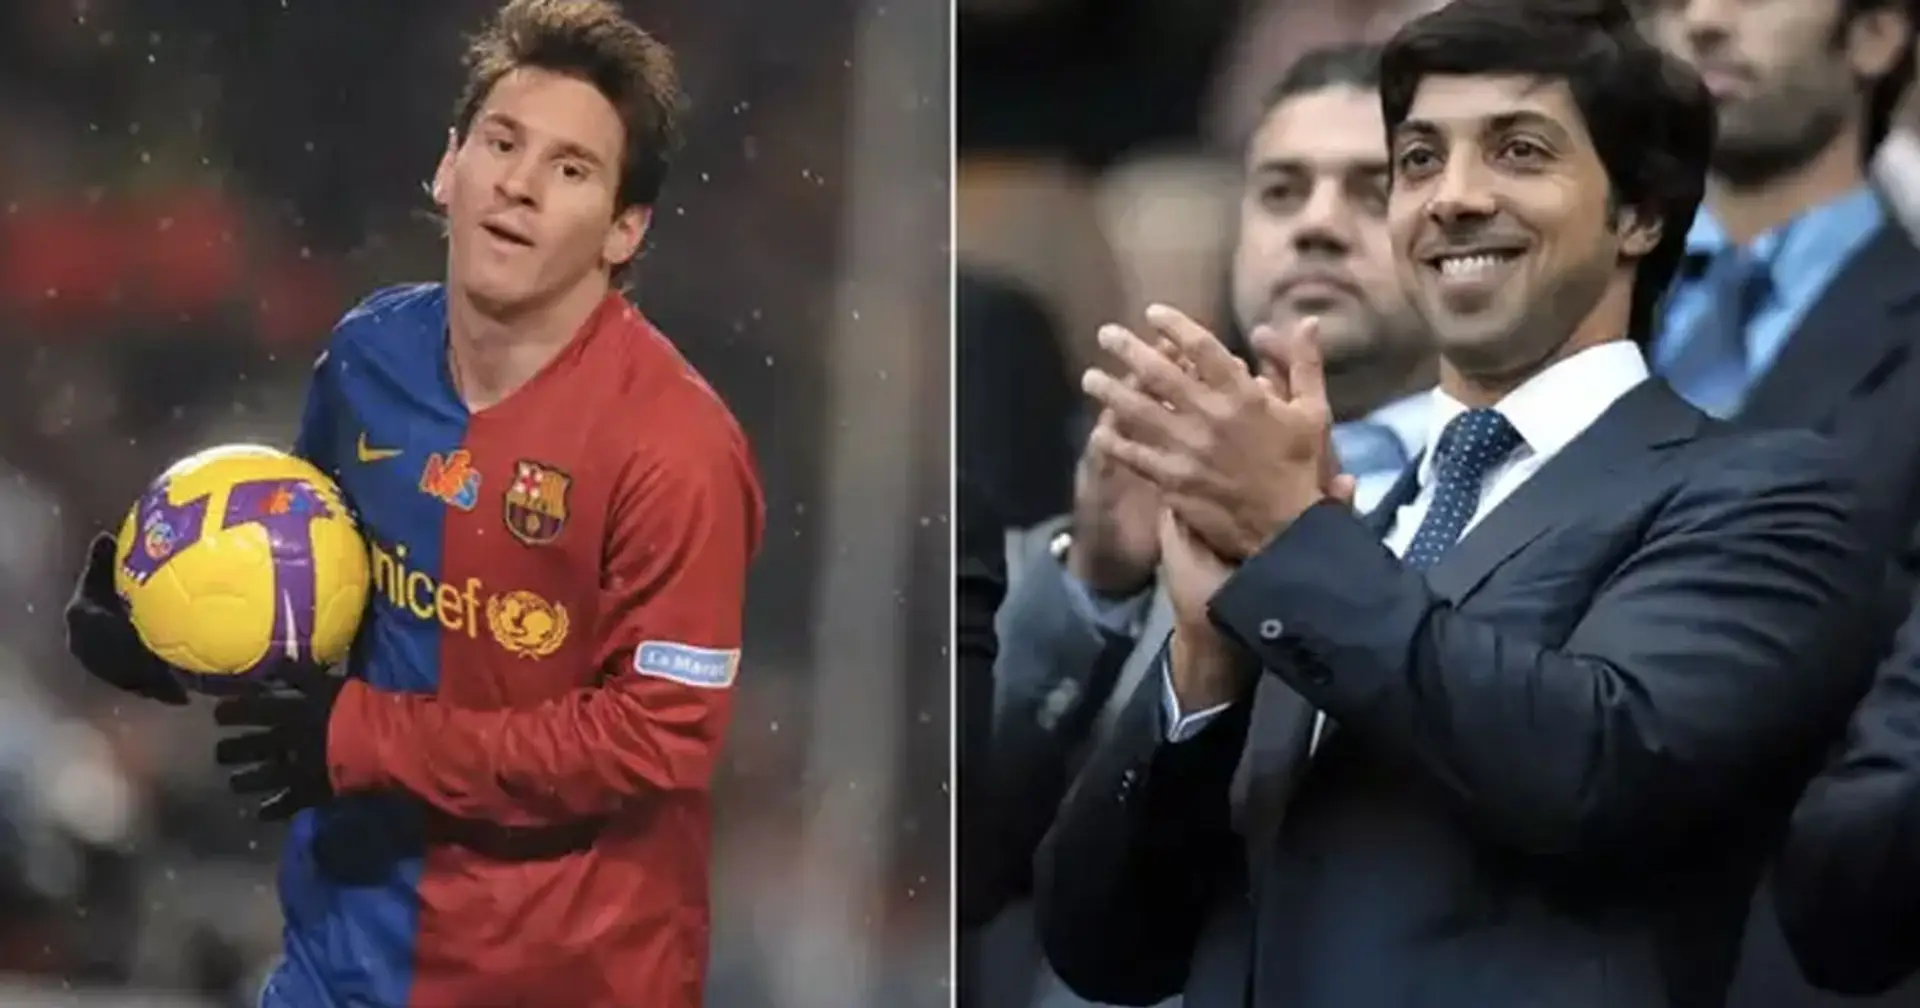 'It was a crazy day!': ex-Man City boss recalls bidding for Leo Messi hours after Emirati takeover